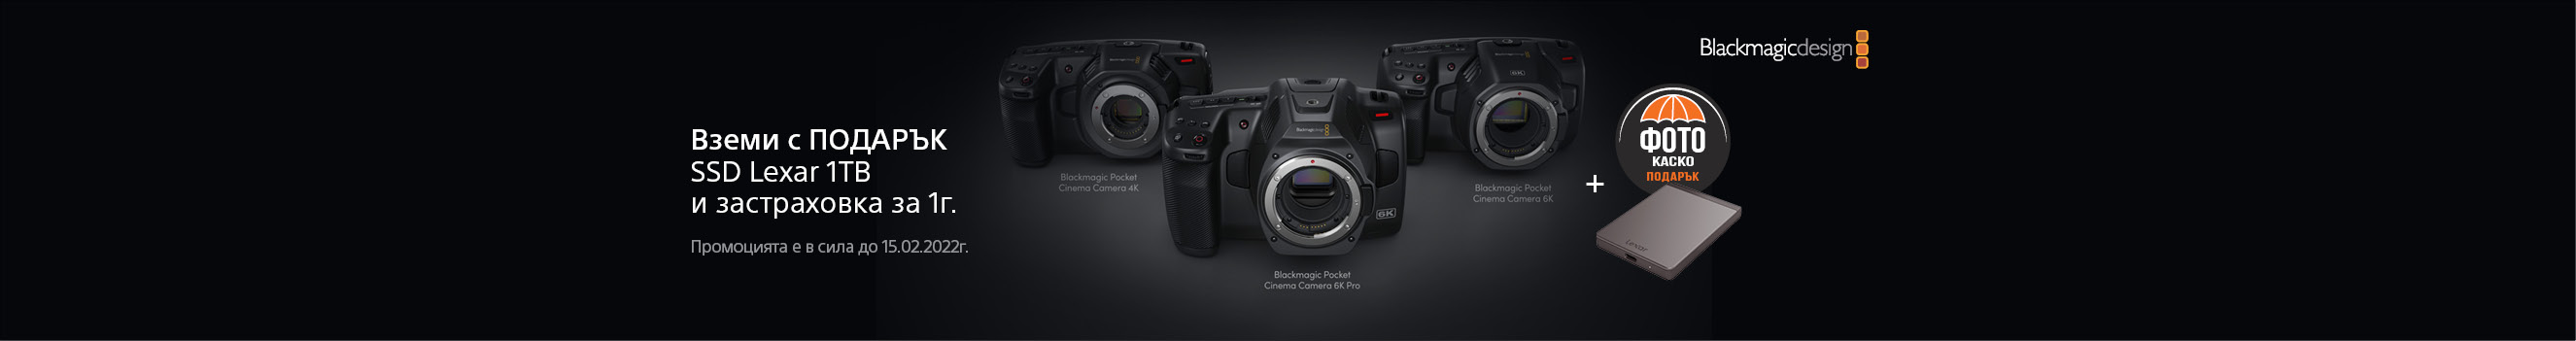  Blackmagic Design Cameras + Gifts in PhotoSynthesis Stores